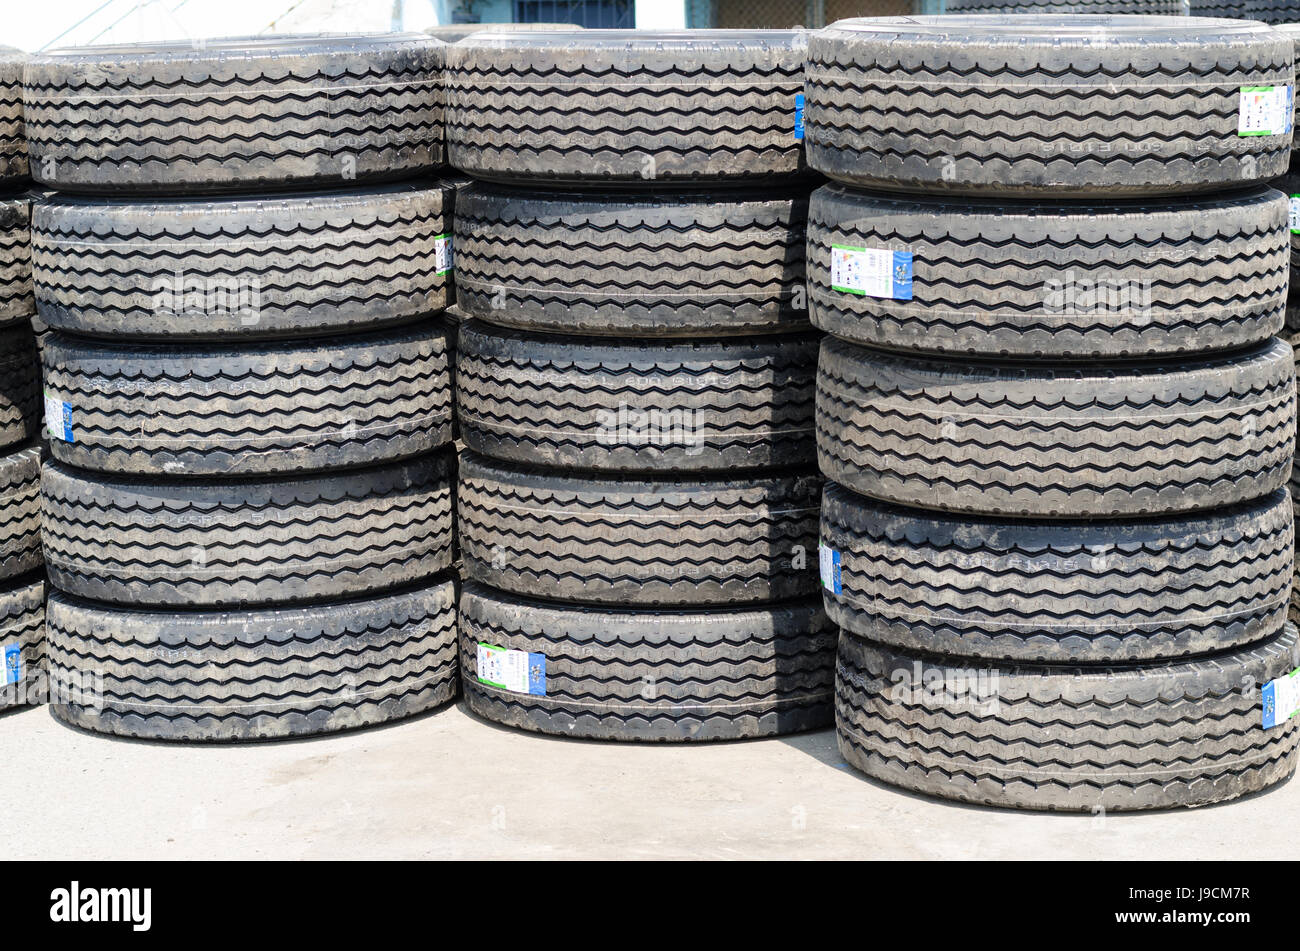 New truck tires stack up Stock Photo